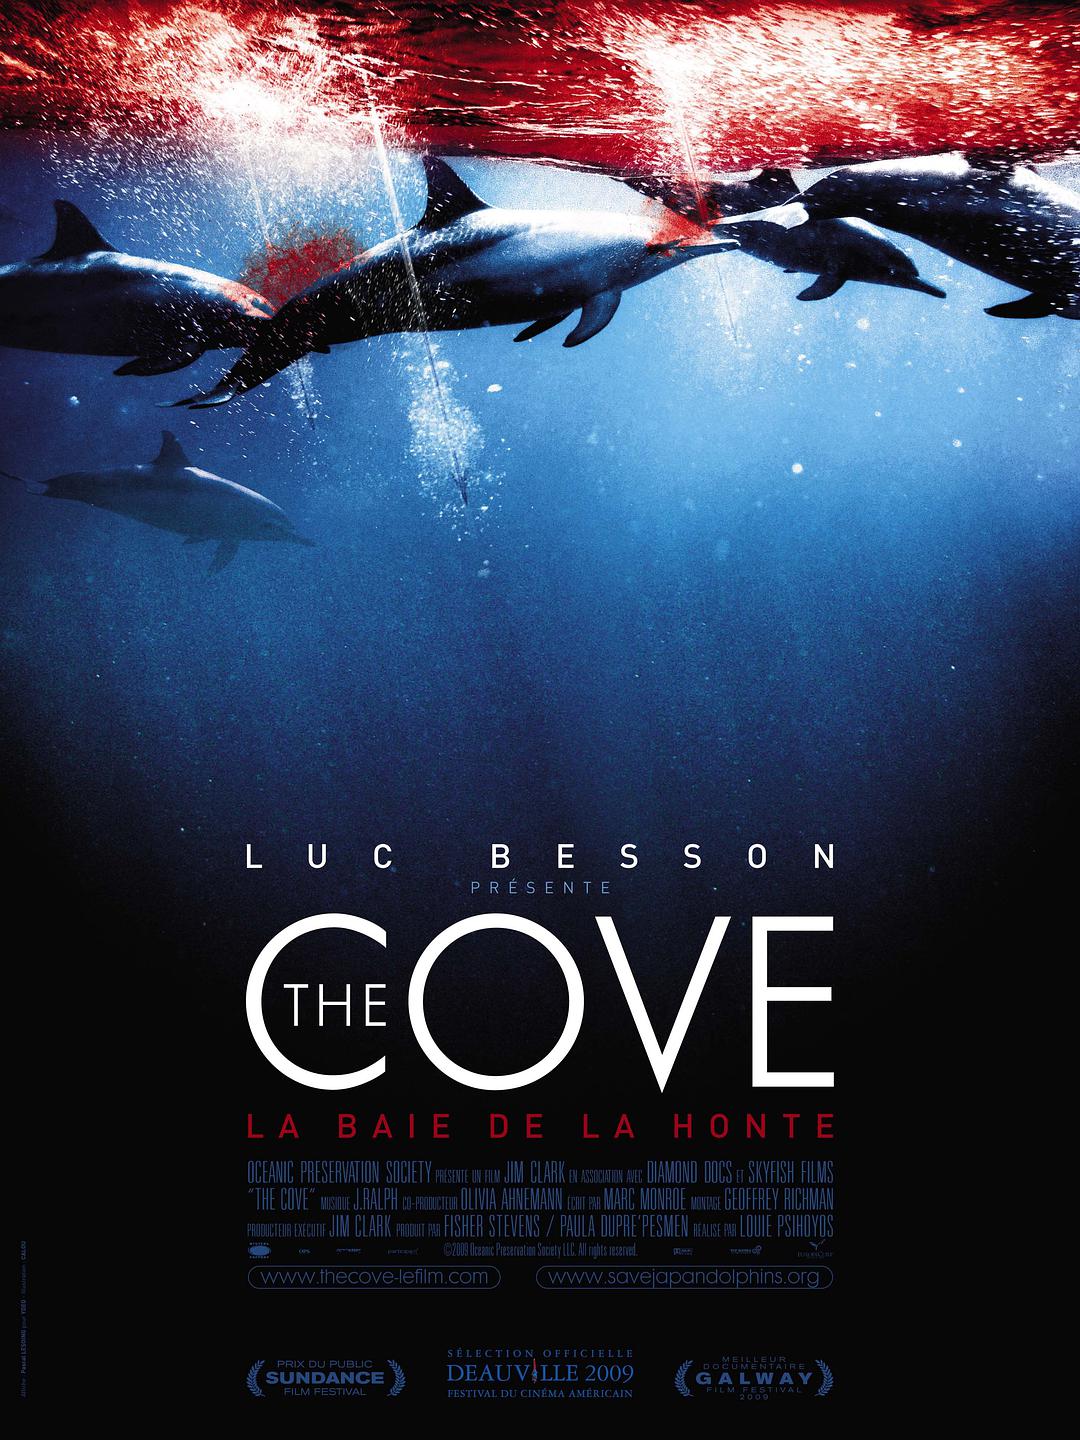  The.Cove.2009.1080p.BluRay.x264.DTS-FGT 6.22GB-1.png